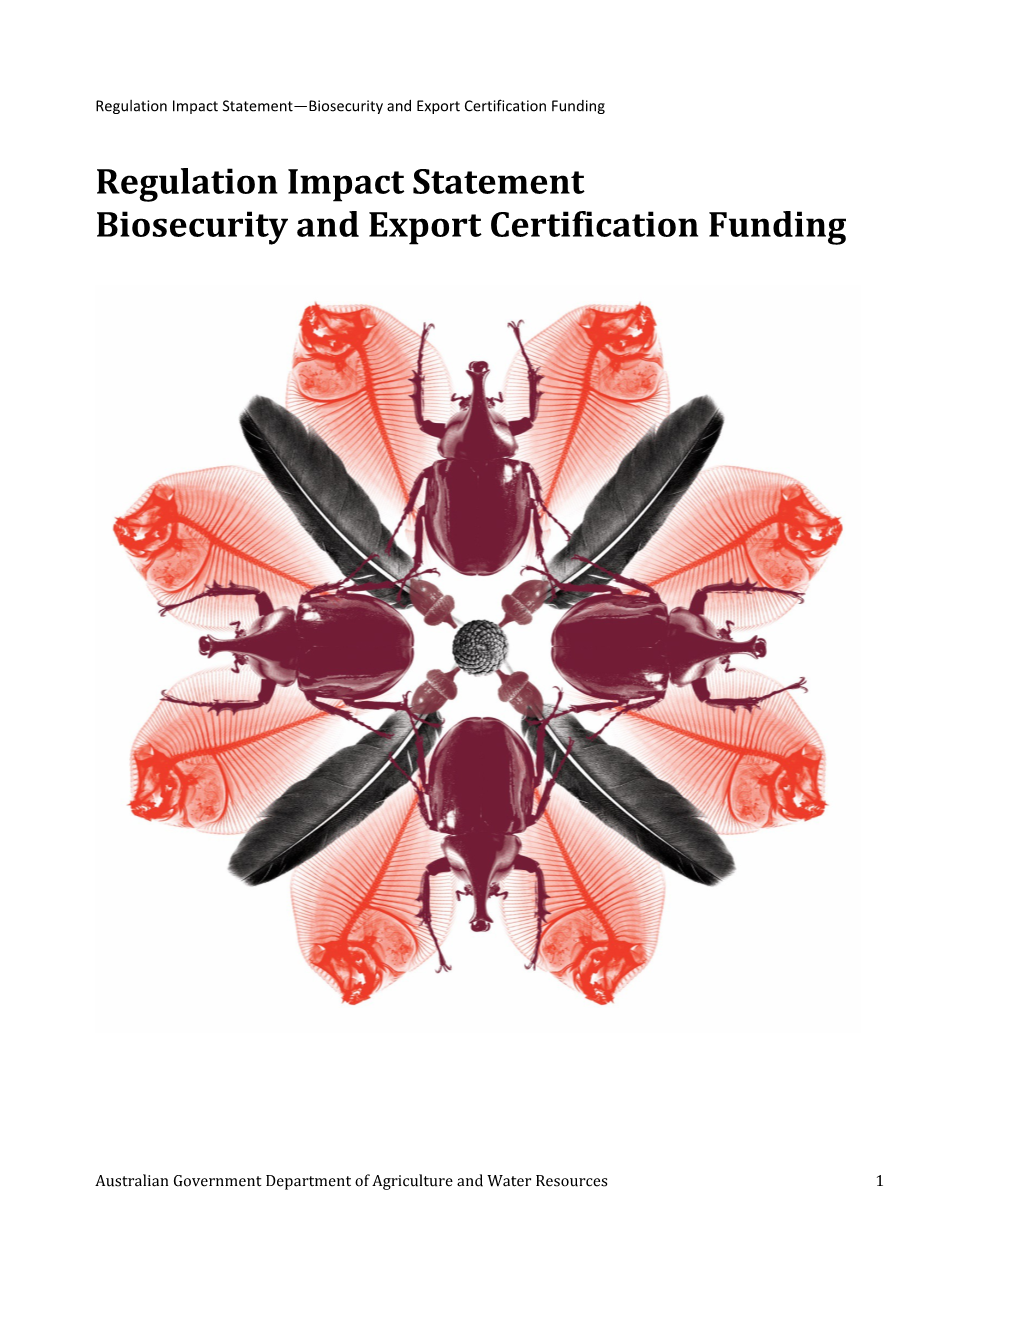 Regulation Impact Statementbiosecurity and Export Certification Funding